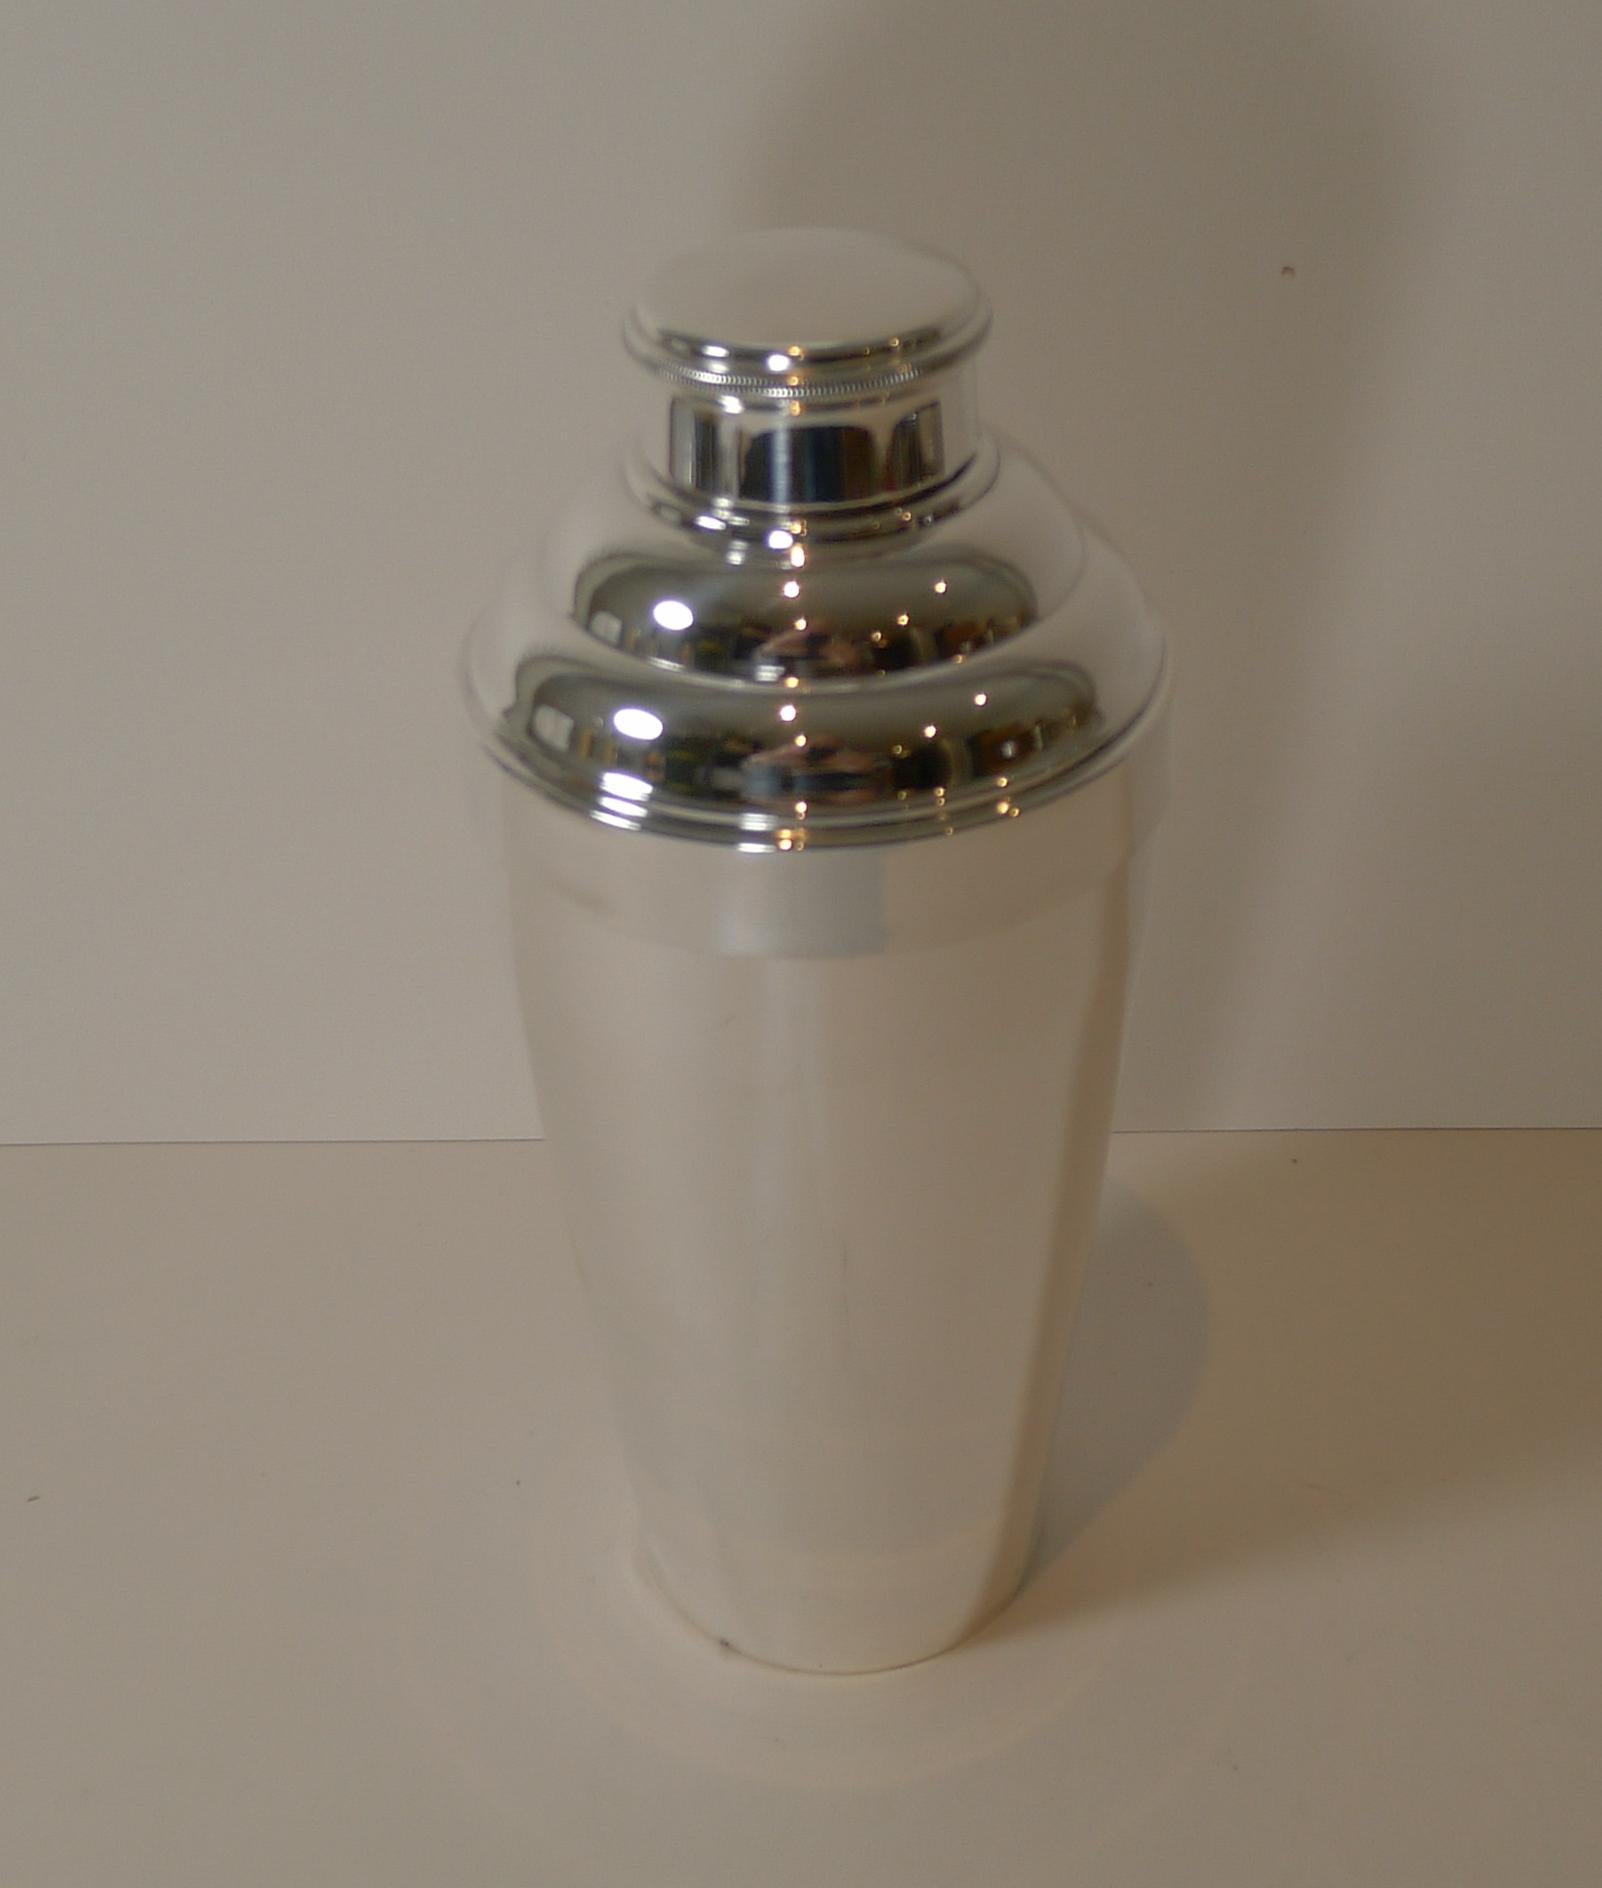 A handsome large silver plated cocktail shaker, French in origin, fully marked on the underside as the per the photographs. Art Deco in era dating to the 1930's.

Just back from our silversmith's workshop where it has been professionally cleaned